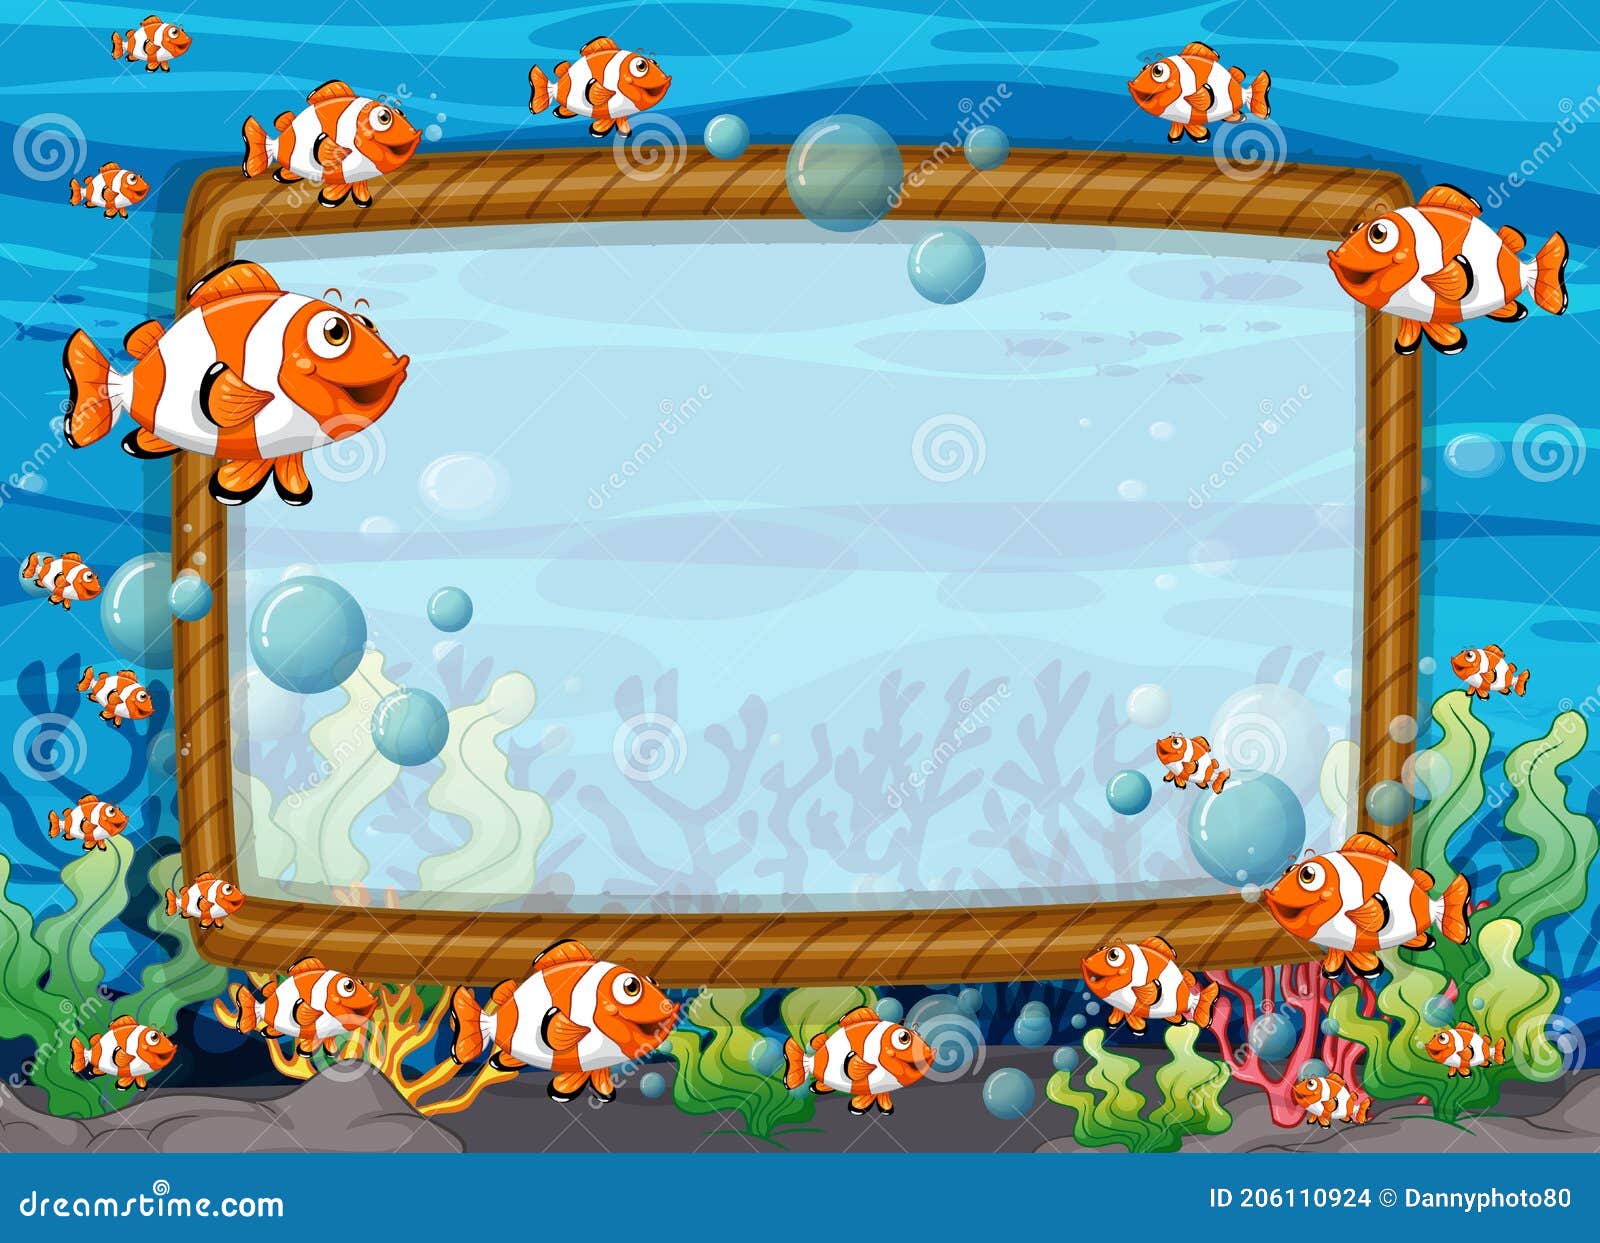 Blank Frame Template with Exotic Fishes Cartoon Character in the Underwater  Scene Stock Vector - Illustration of marine, banner: 206110924